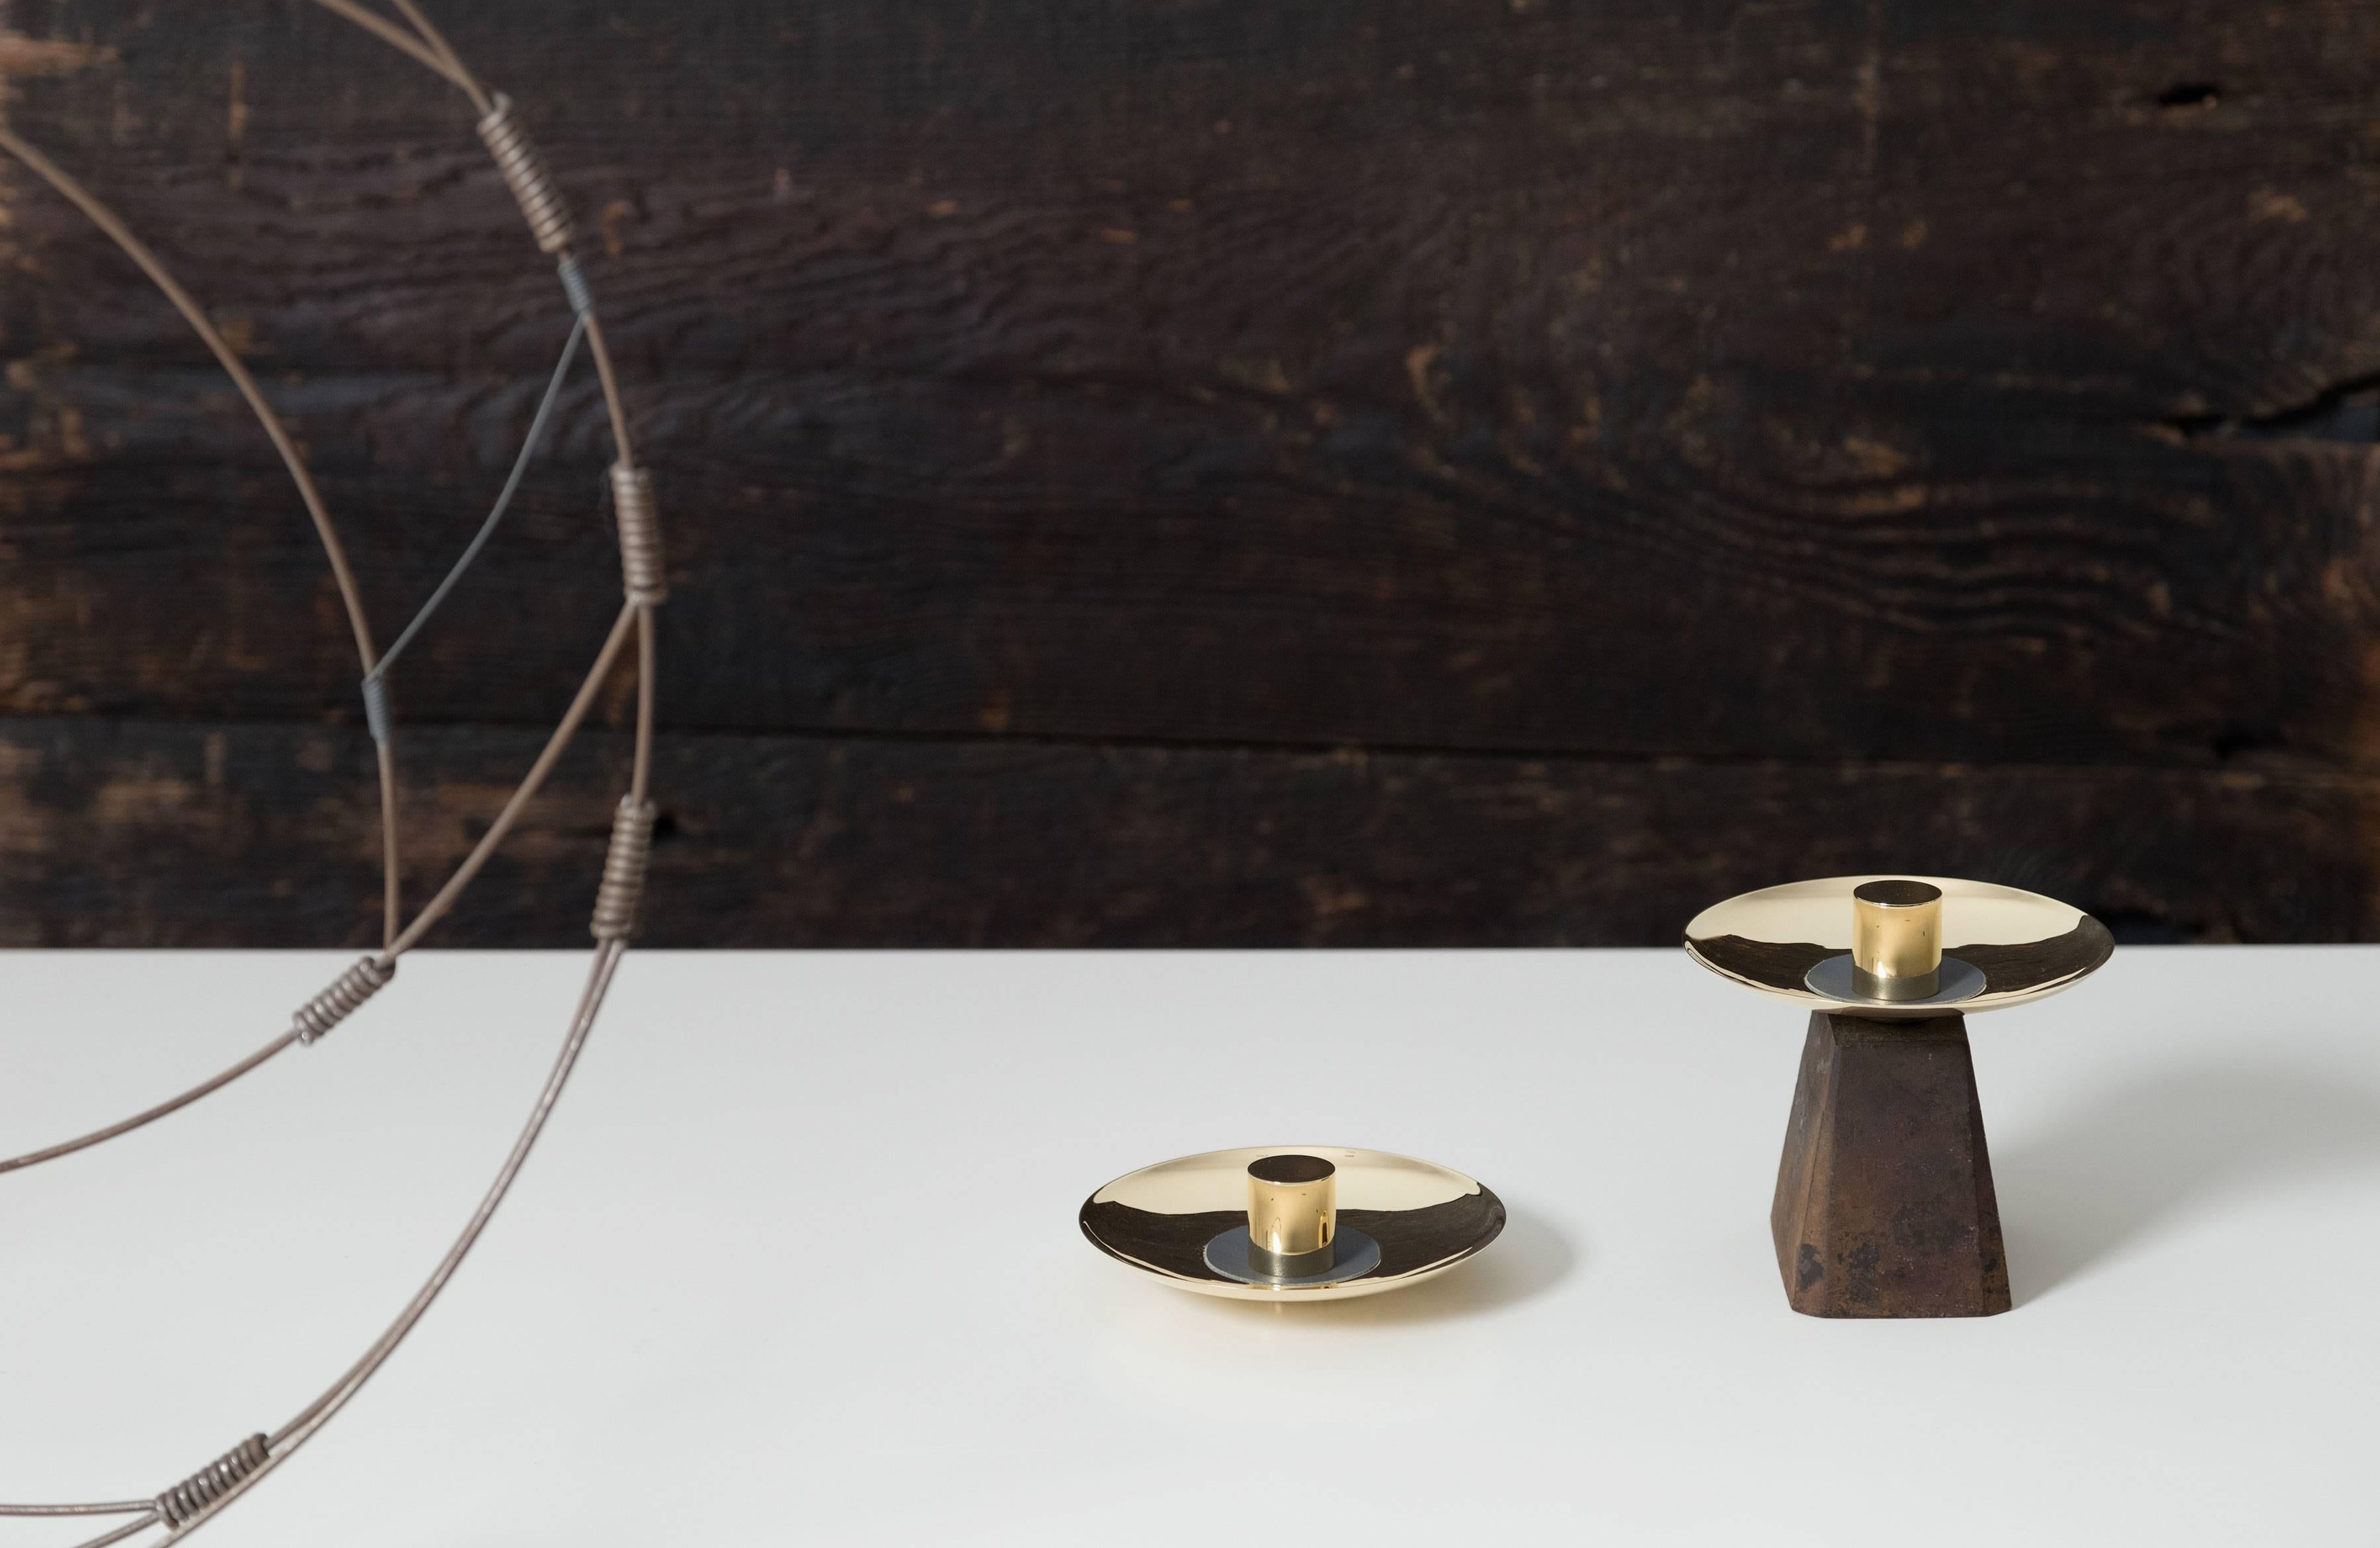 Part of Les Few's Julie collection, this contemporary, round, leather and brass, modern, Minimalist catch-all is made by artisans in Sweden. The leather comes in either anthracite gray or taupe. The brass is solid Swedish brass and the Italian